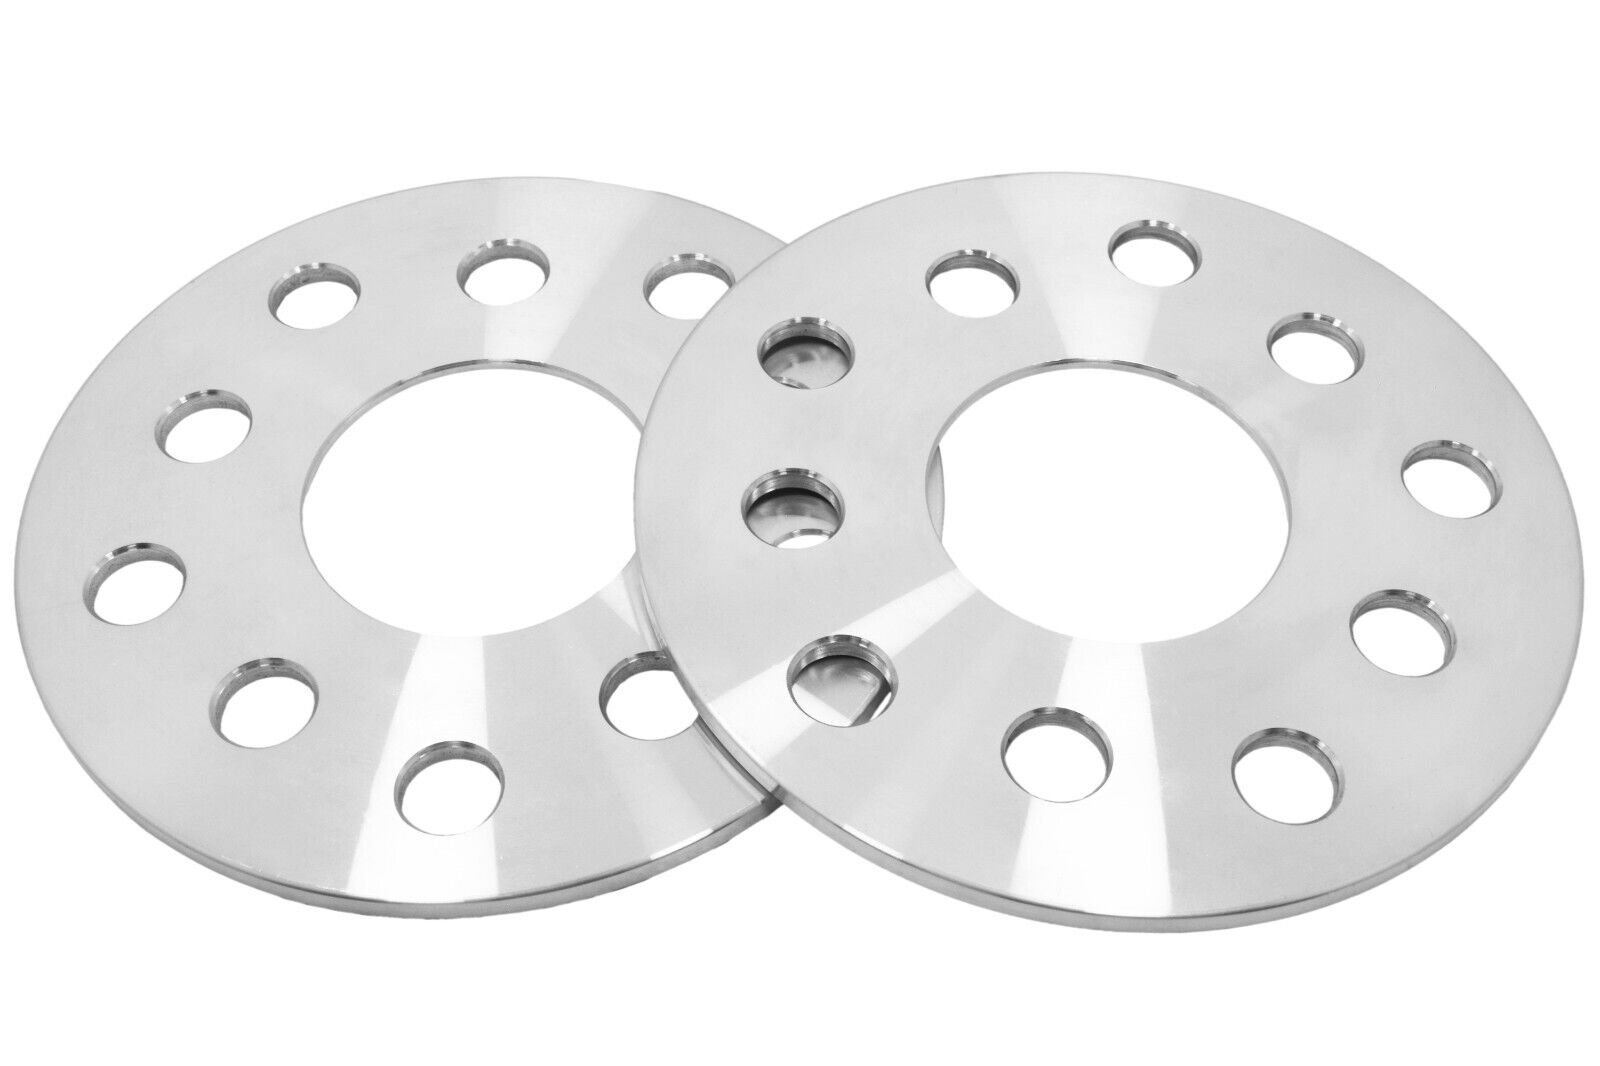 2 PC BMW WHEEL SPACERS 5X120 72.56 ( 3MM THICK ) FITS 1 SERIES 3 SERIES 5 SERIES